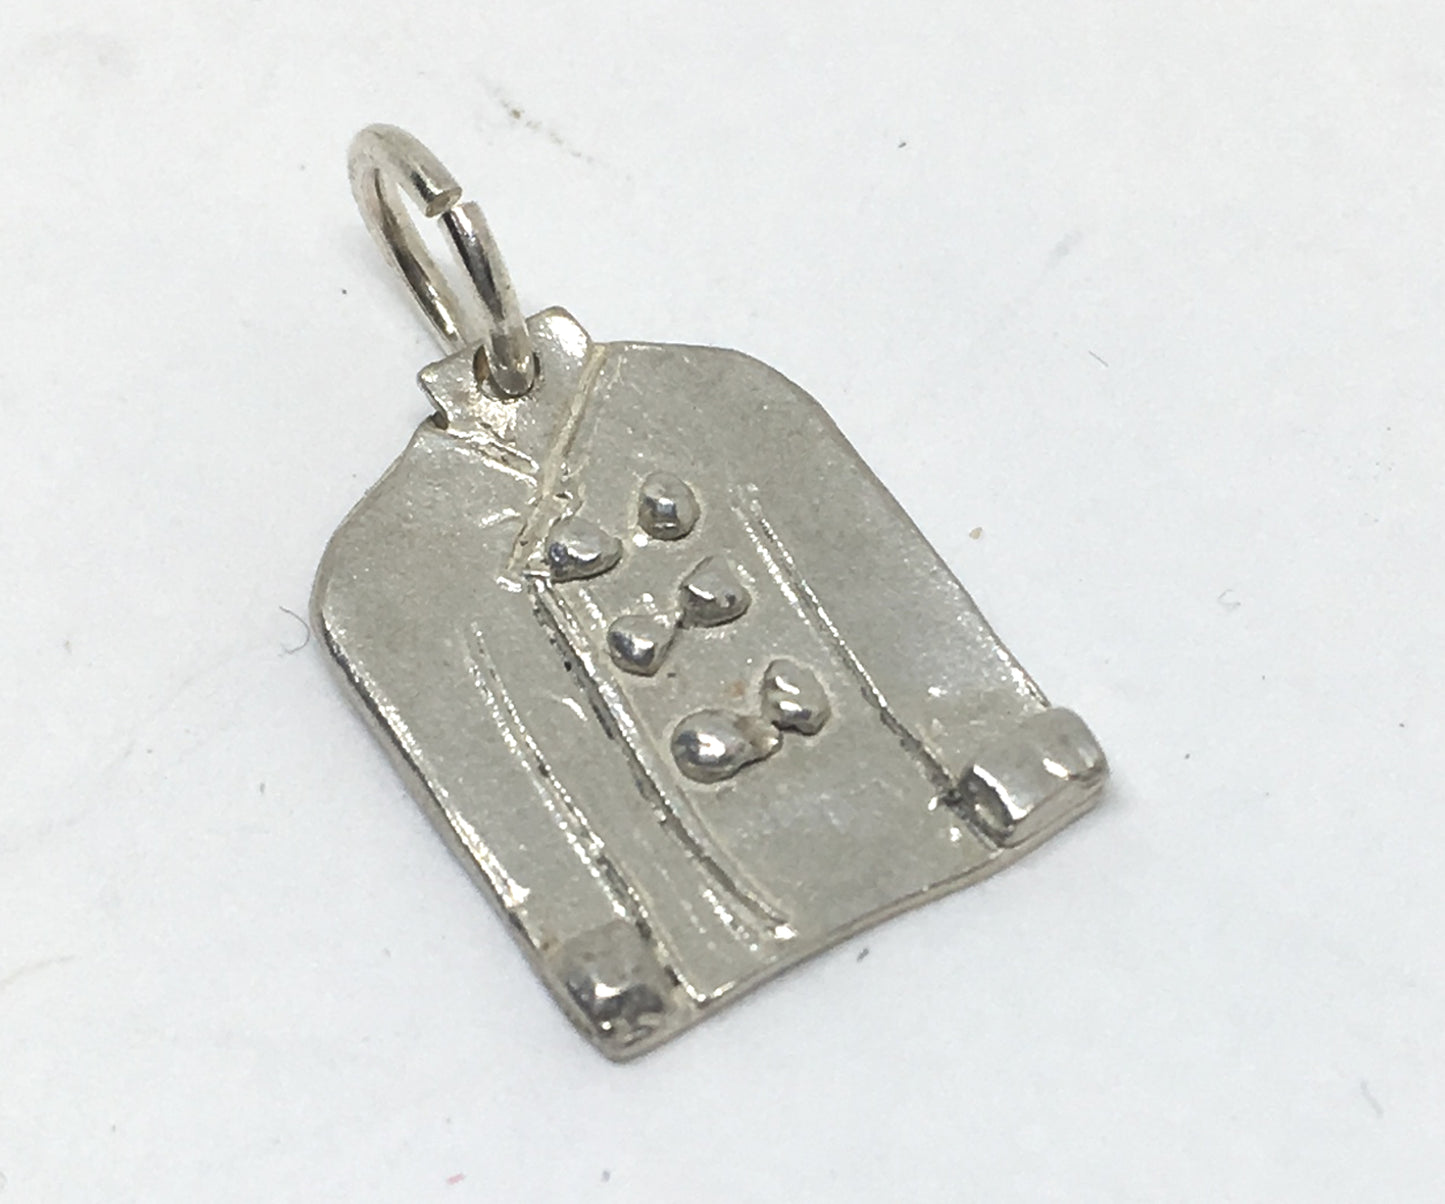 Chef Jacket Charm in Sterling Silver